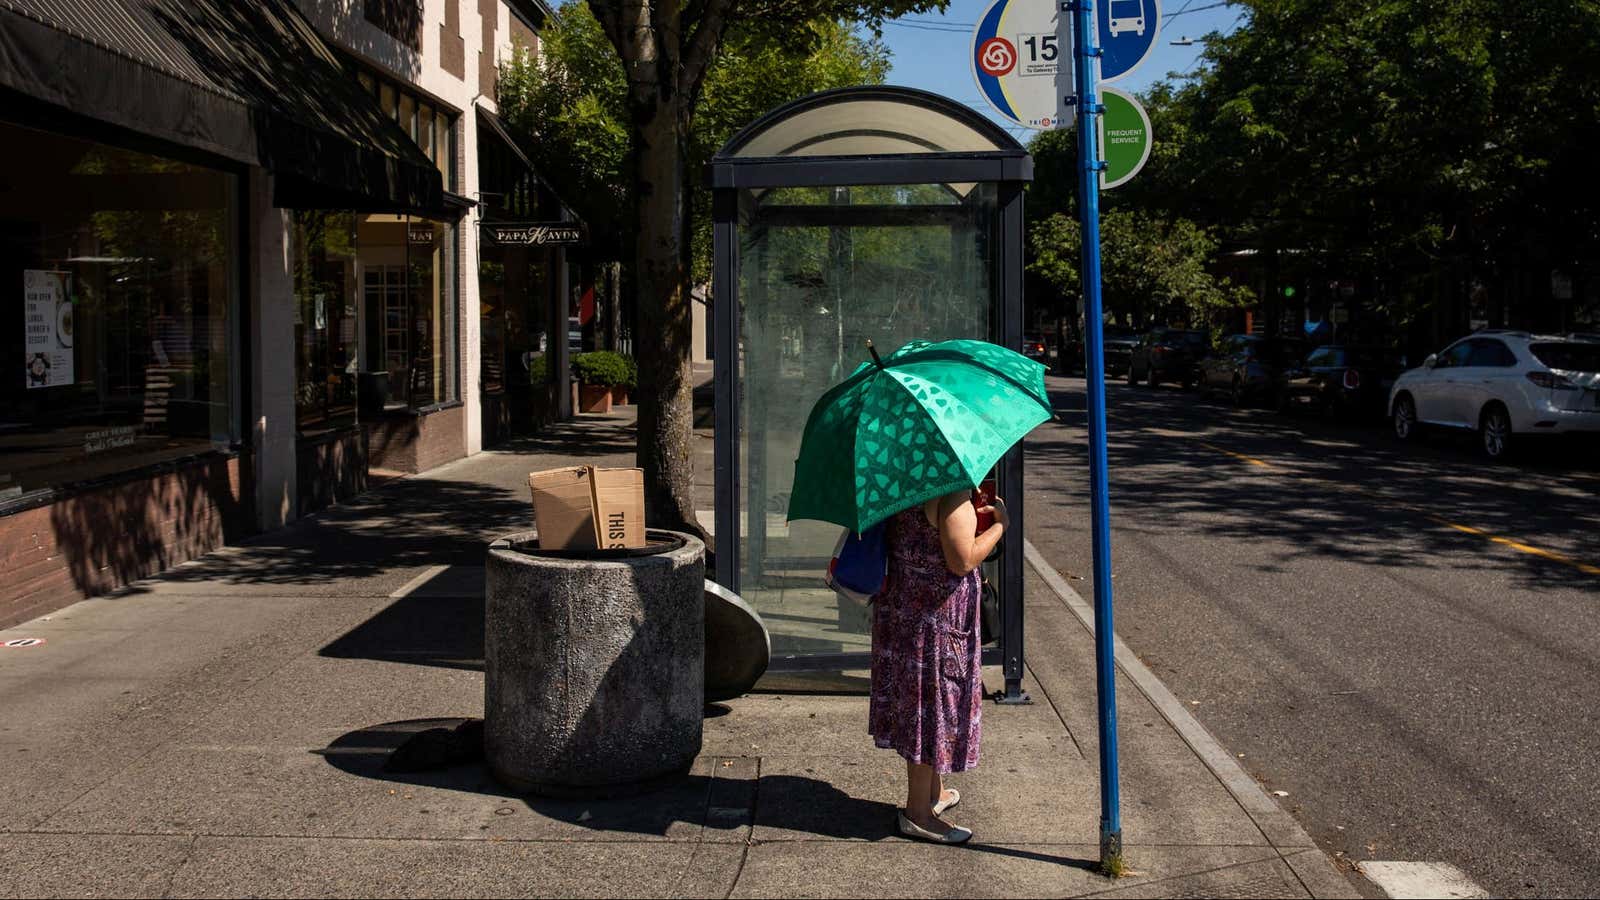 Record-breaking heat has impacted roads and transit in Portland and elsewhere in the Pacific northwest and western Canada.